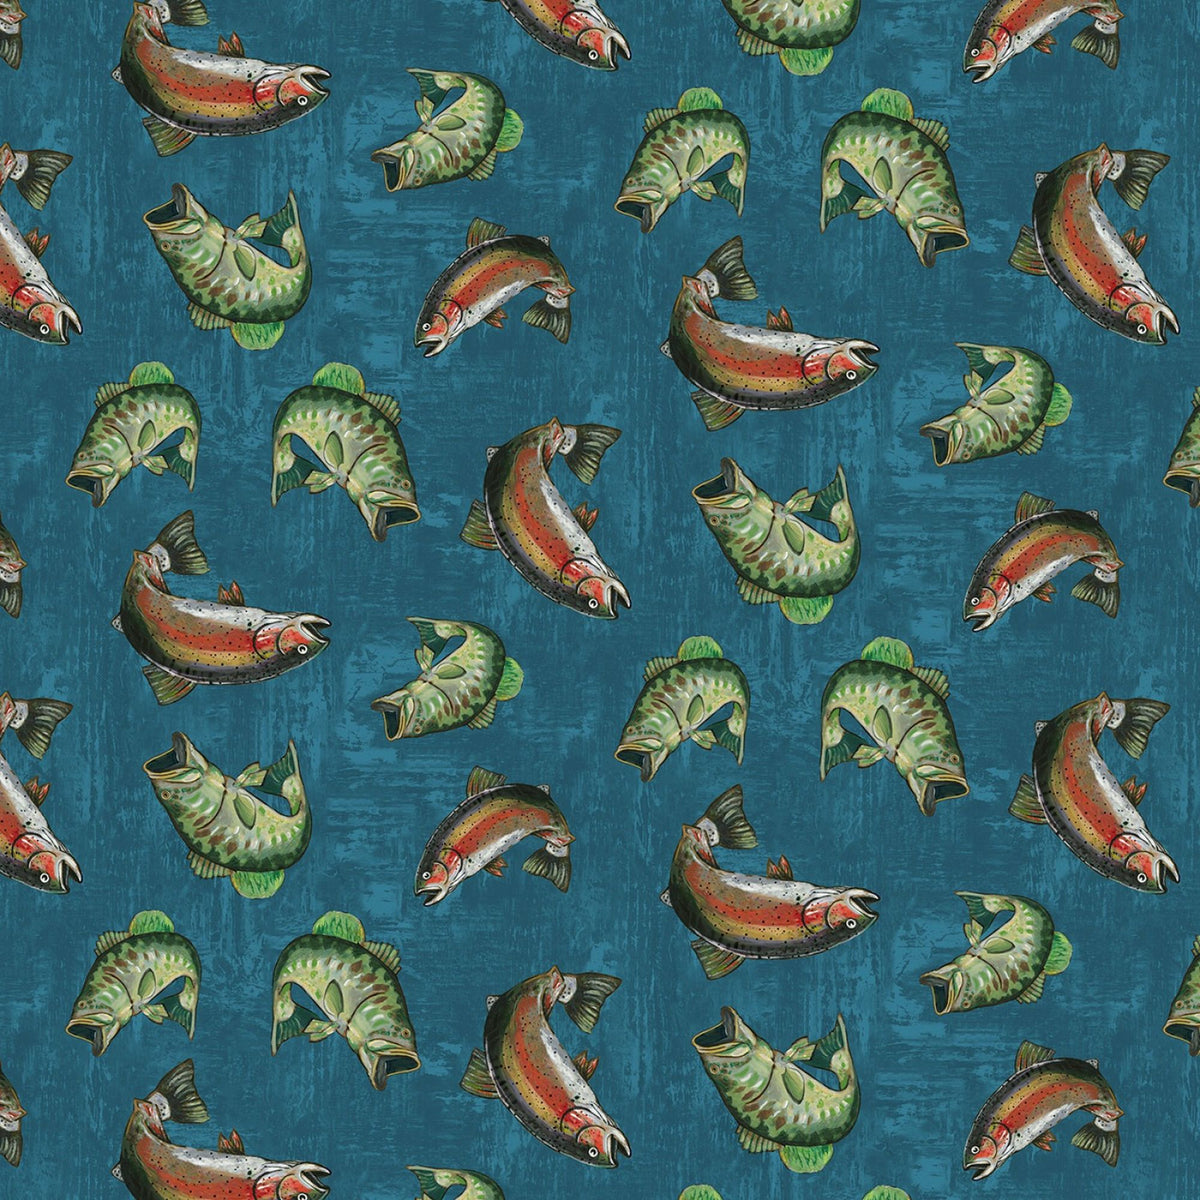 Lake Adventure Blue Fish Toss Fabric 90516-474 from Wilmington by